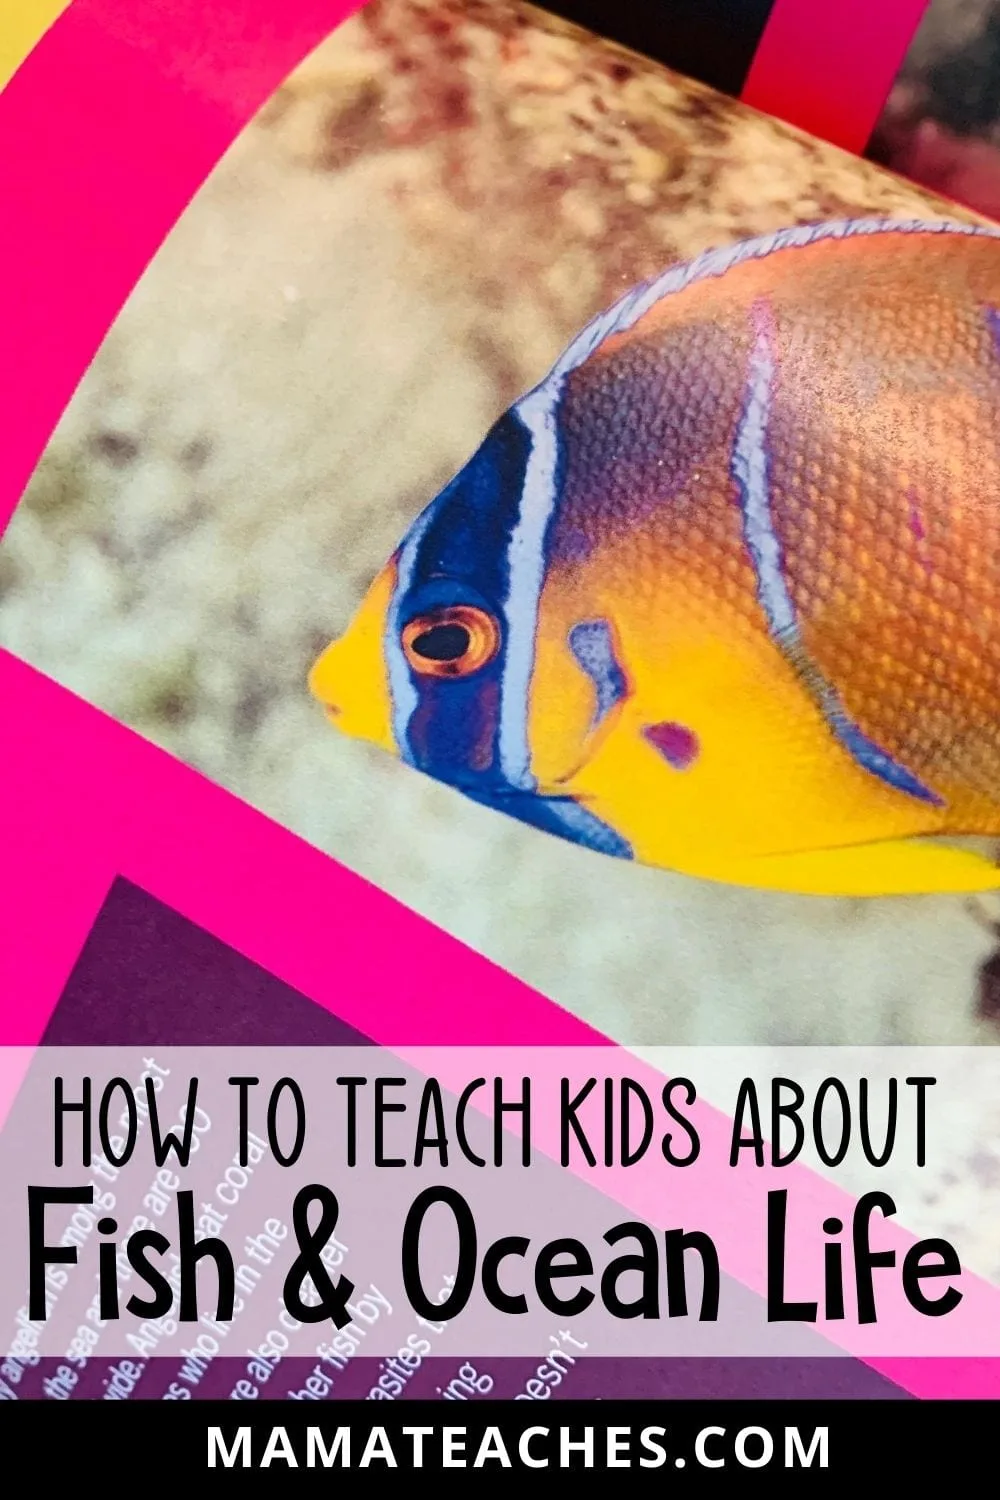 How to Teach Kids About Fish and Ocean Life - MamaTeaches.com